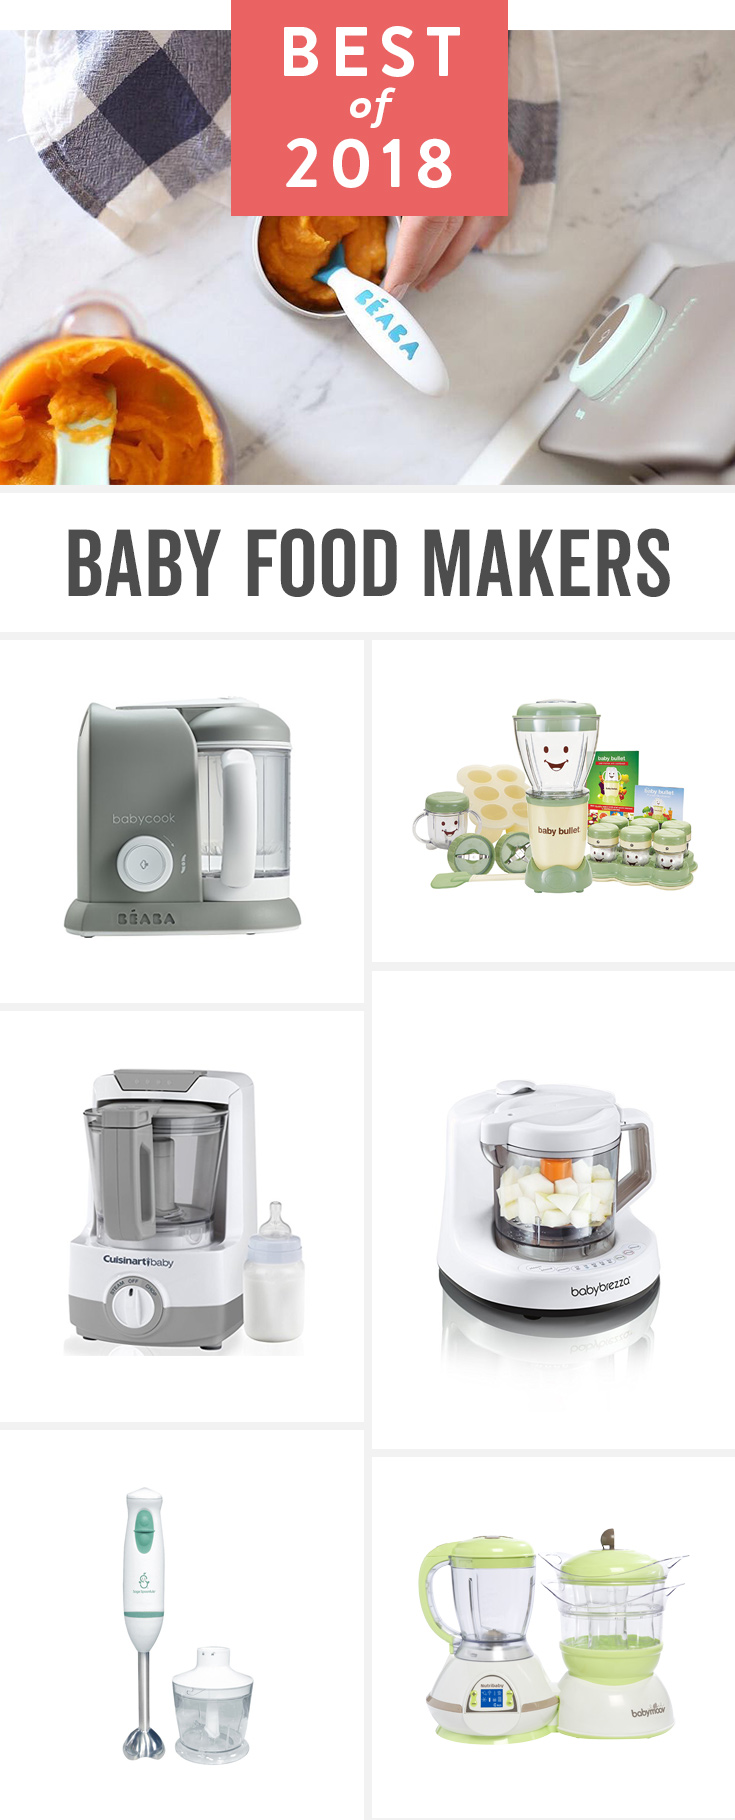 Greatest Baby Food Makers of 2019 - Olly&Owl